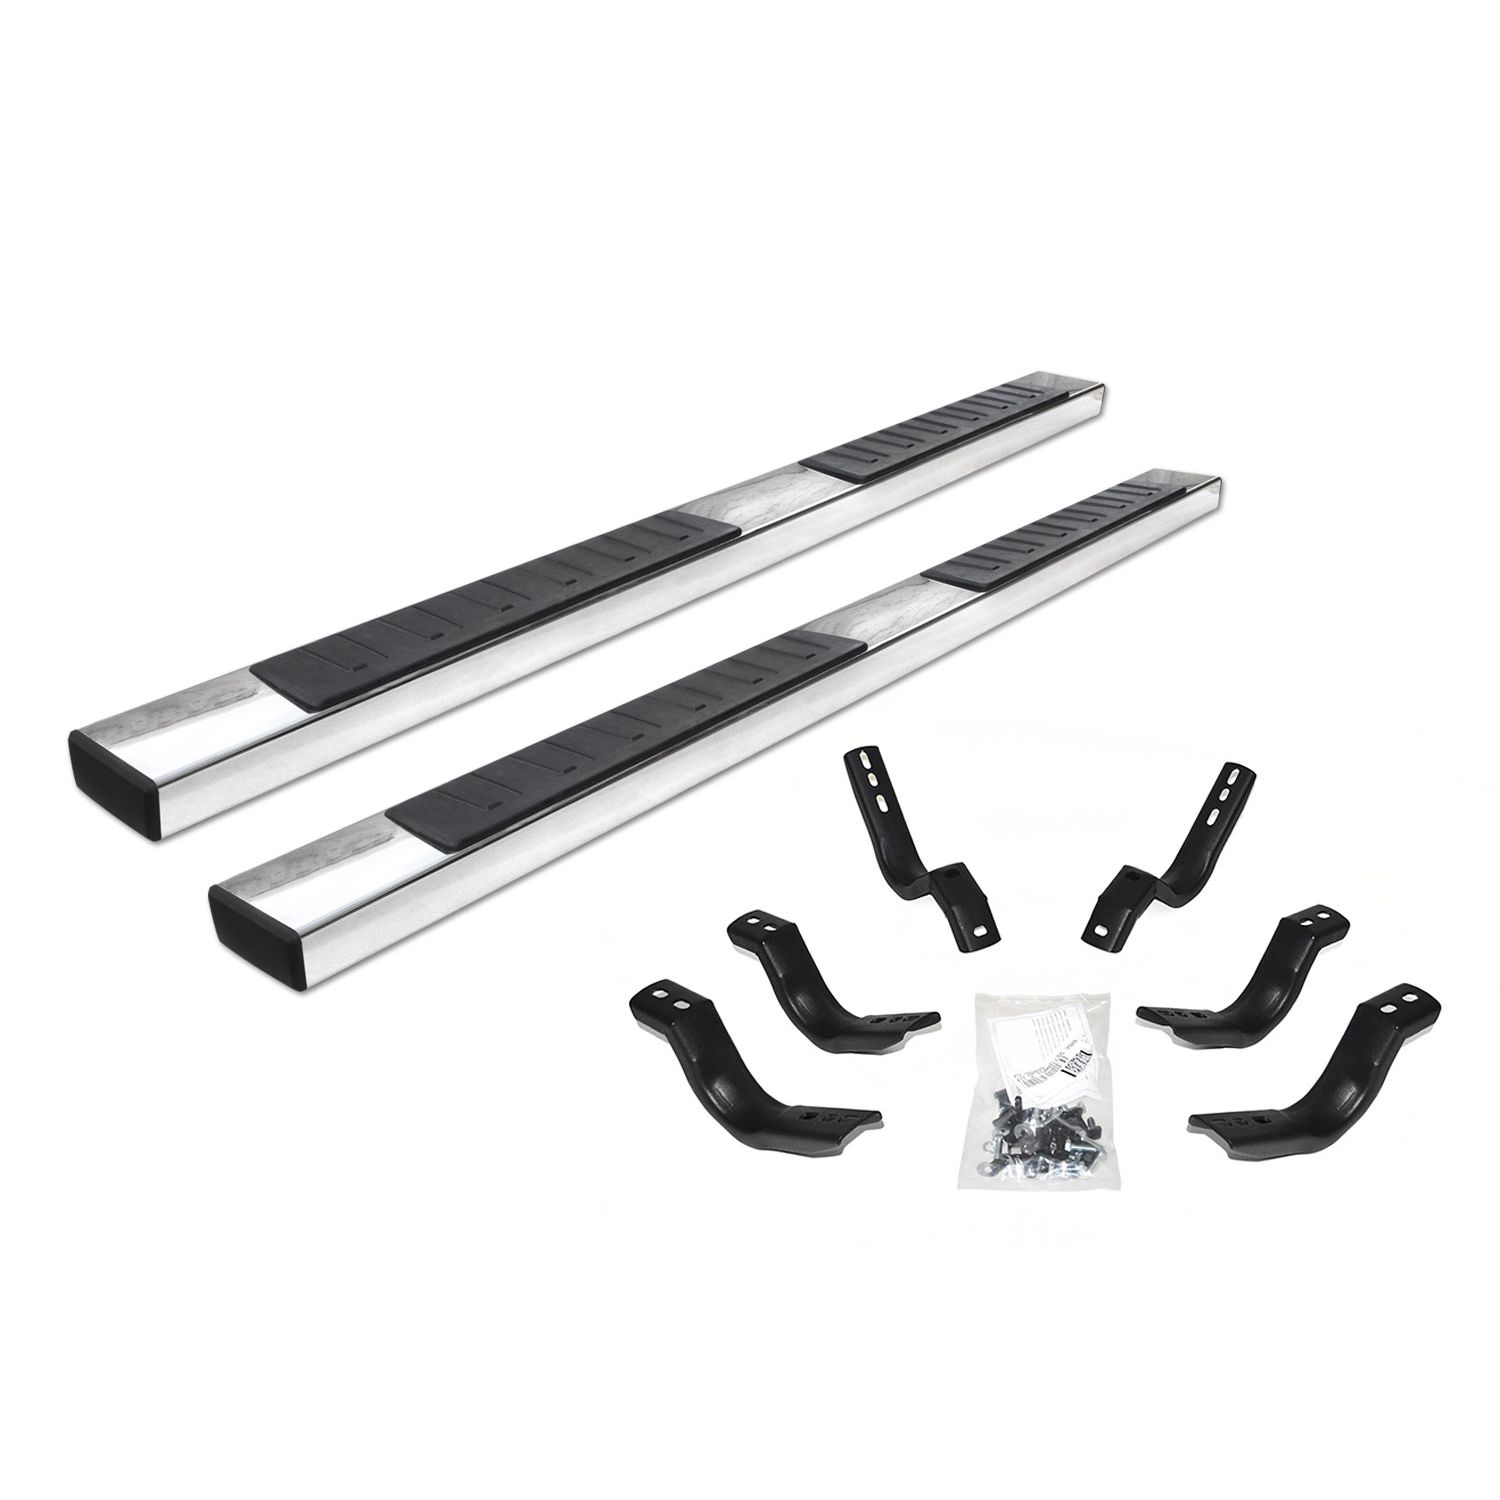 Go Rhino 6862442987PS - 6" OE Xtreme II SideSteps With Mounting Bracket Kit - Polished Stainless Steel